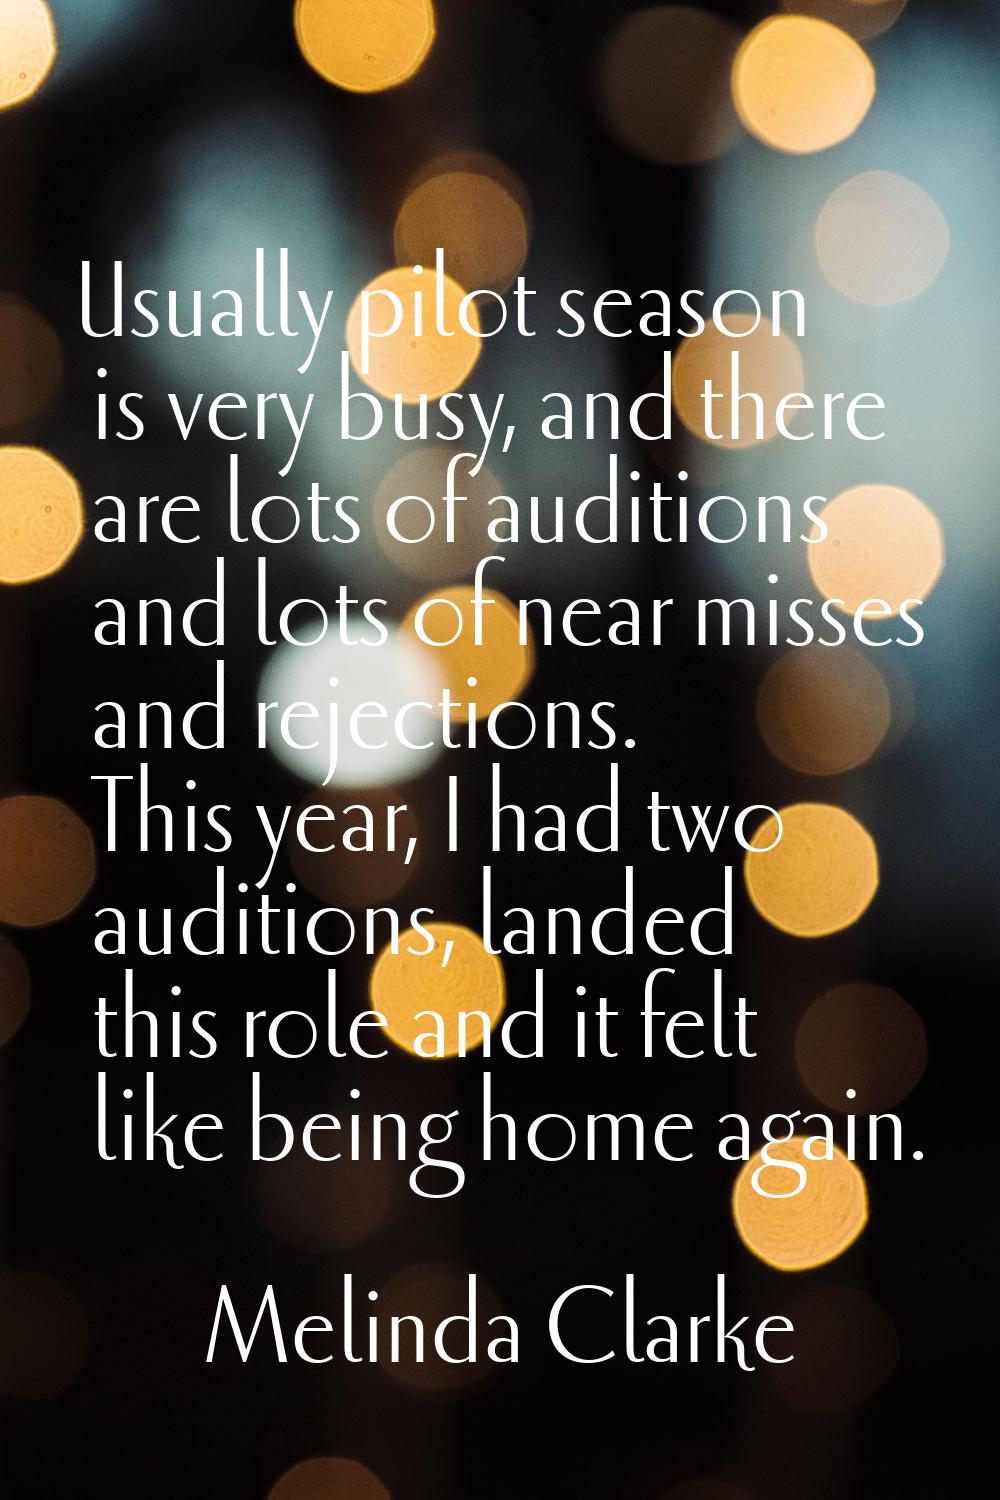 Usually pilot season is very busy, and there are lots of auditions and lots of near misses and reje